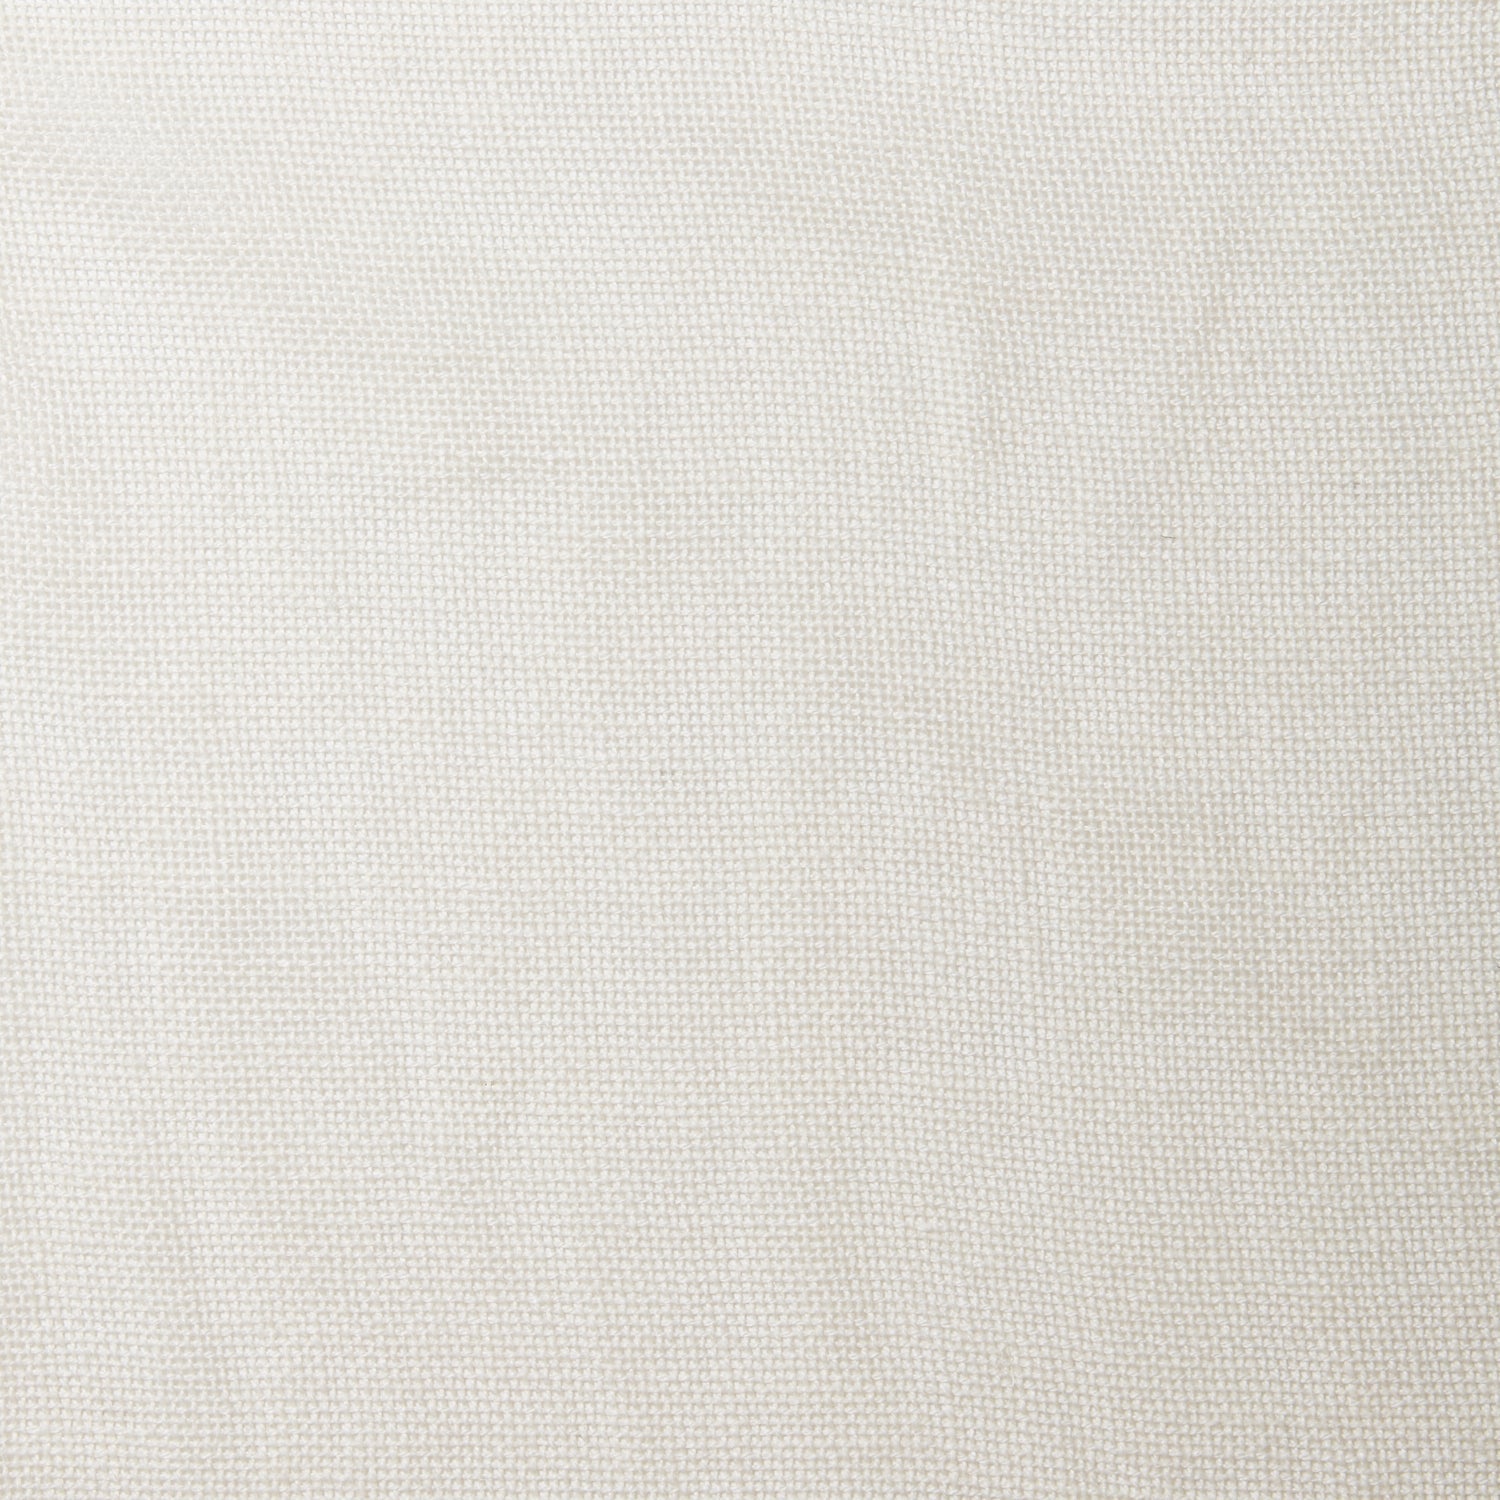 A swatch of open-weave sheer interior fabric in a cream color.